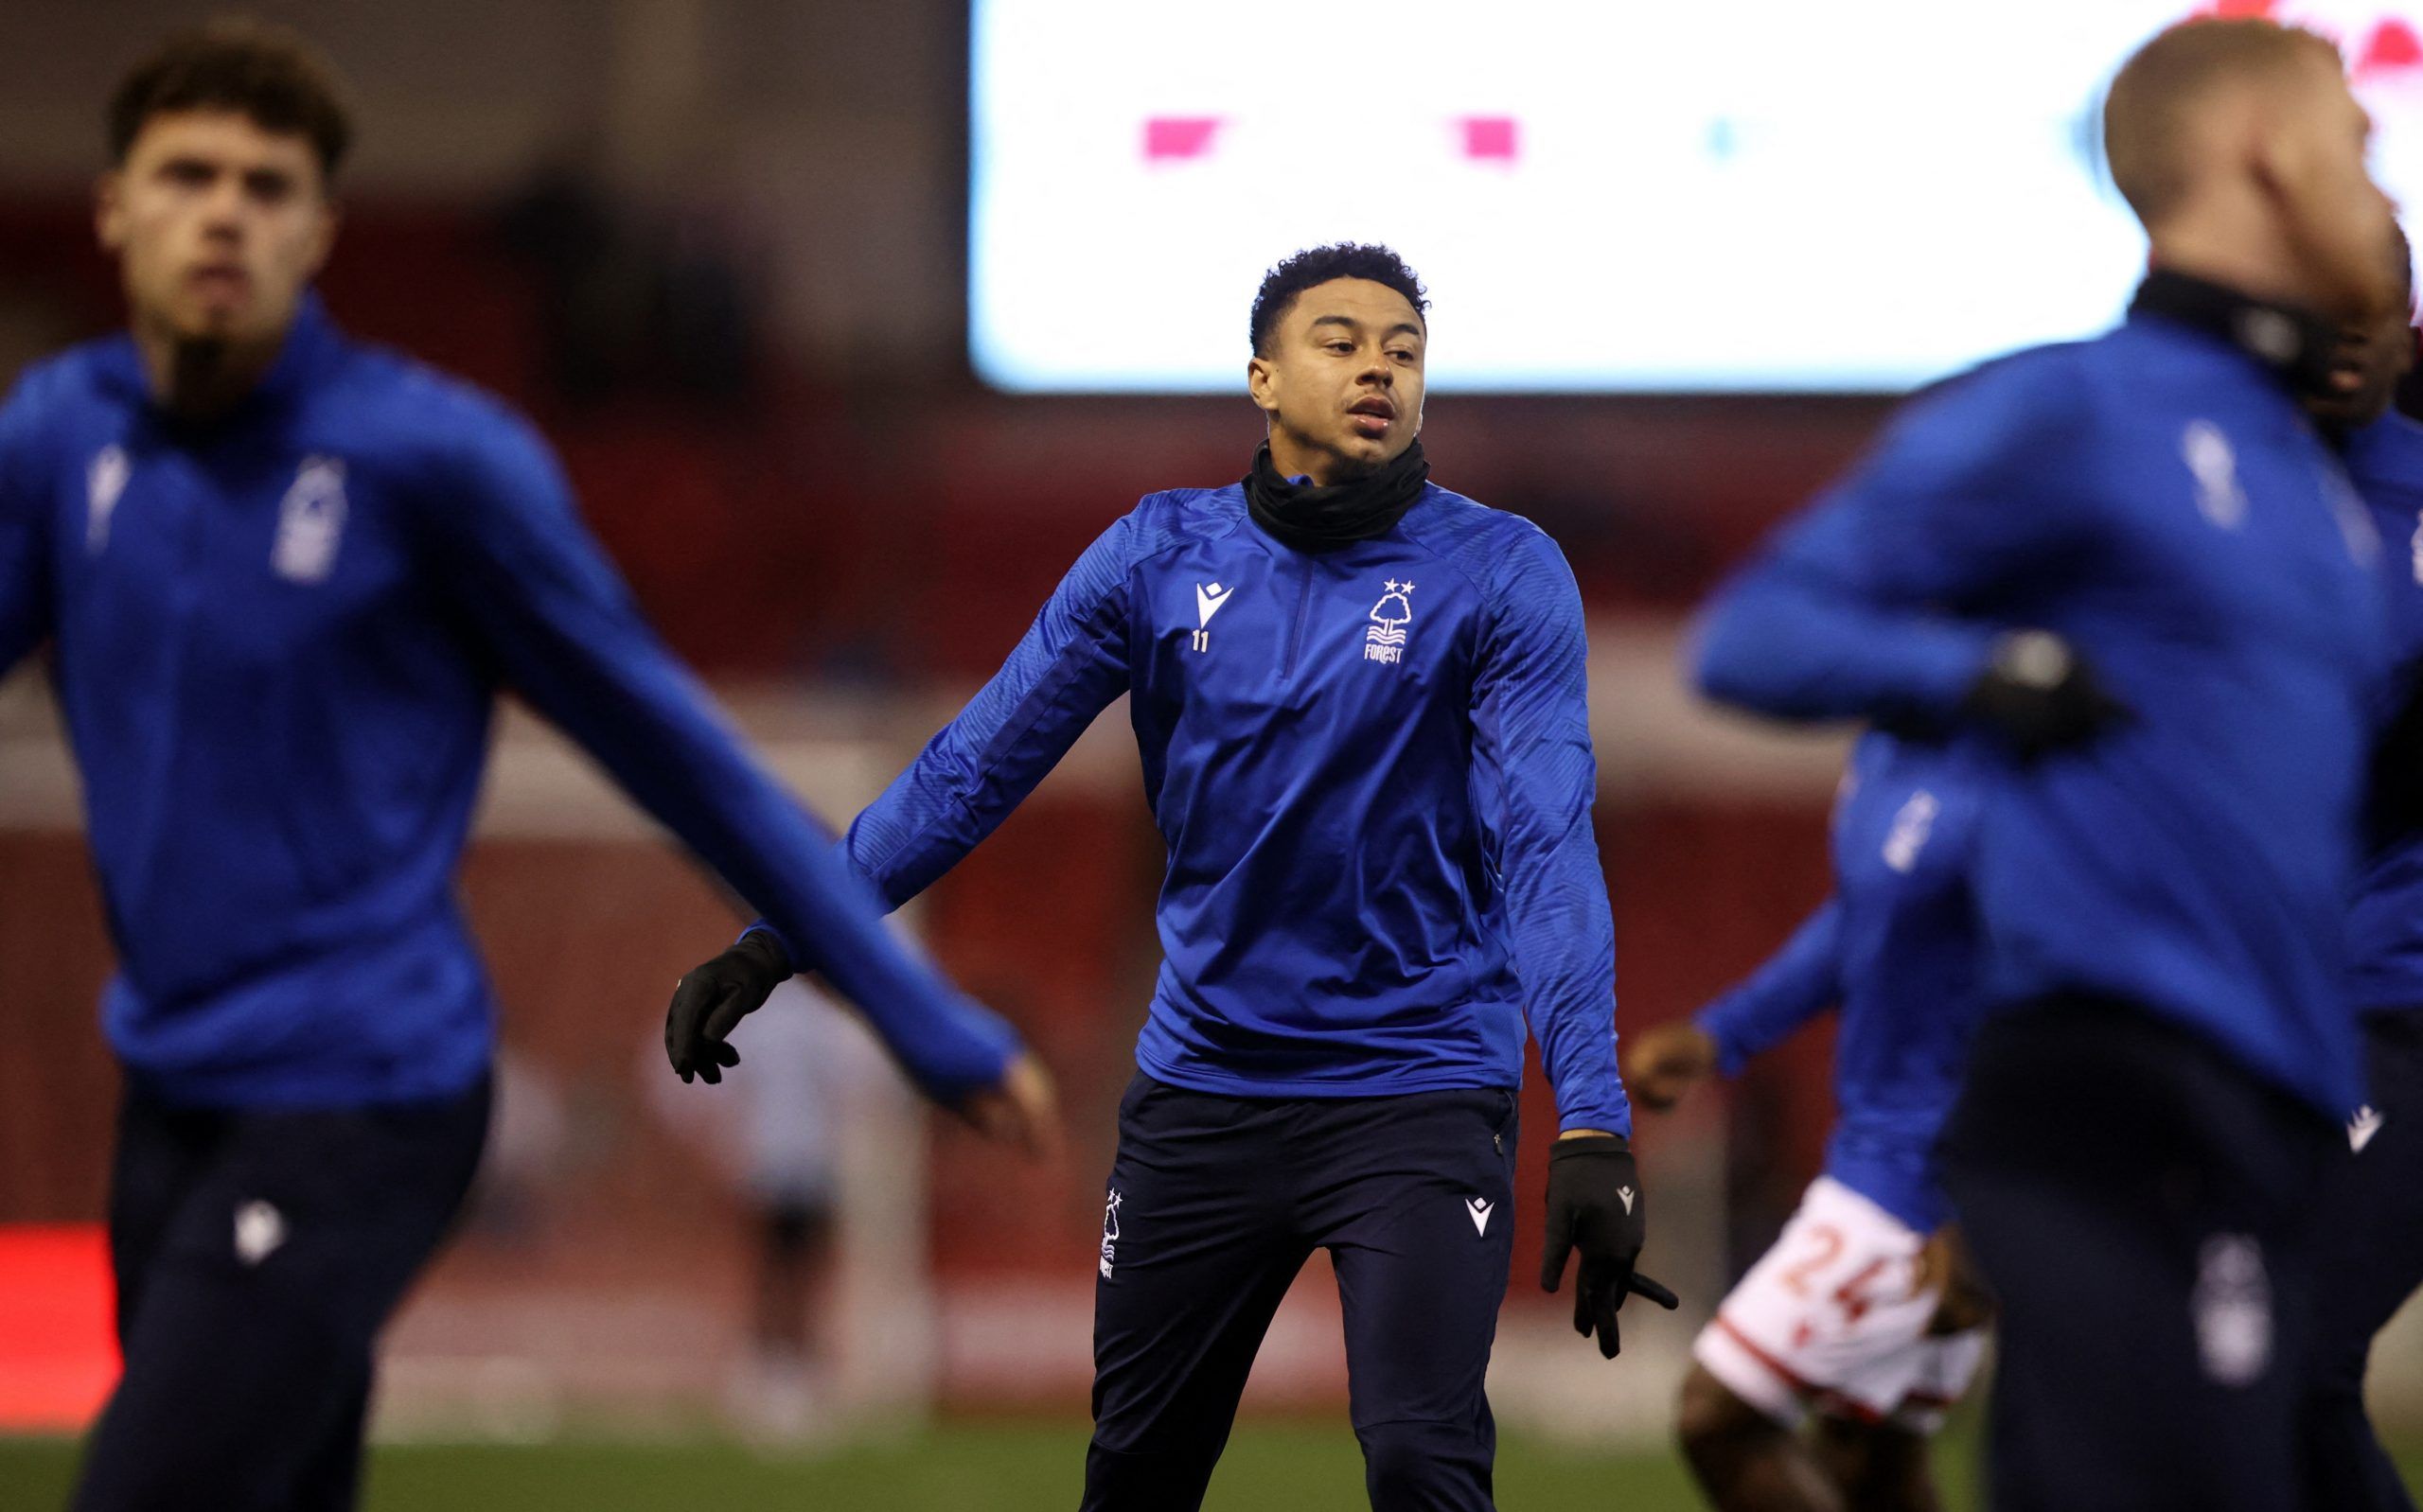 Soccer Football - Premier League - Nottingham Forest v Aston Villa - The City Ground, Nottingham, Britain - October 10, 2022 Nottingham Forest's Jesse Lingard during the warm up before the match Action Images via Reuters/Molly Darlington EDITORIAL USE ONLY. No use with unauthorized audio, video, data, fixture lists, club/league logos or 'live' services. Online in-match use limited to 75 images, no video emulation. No use in betting, games or single club /league/player publications.  Please conta